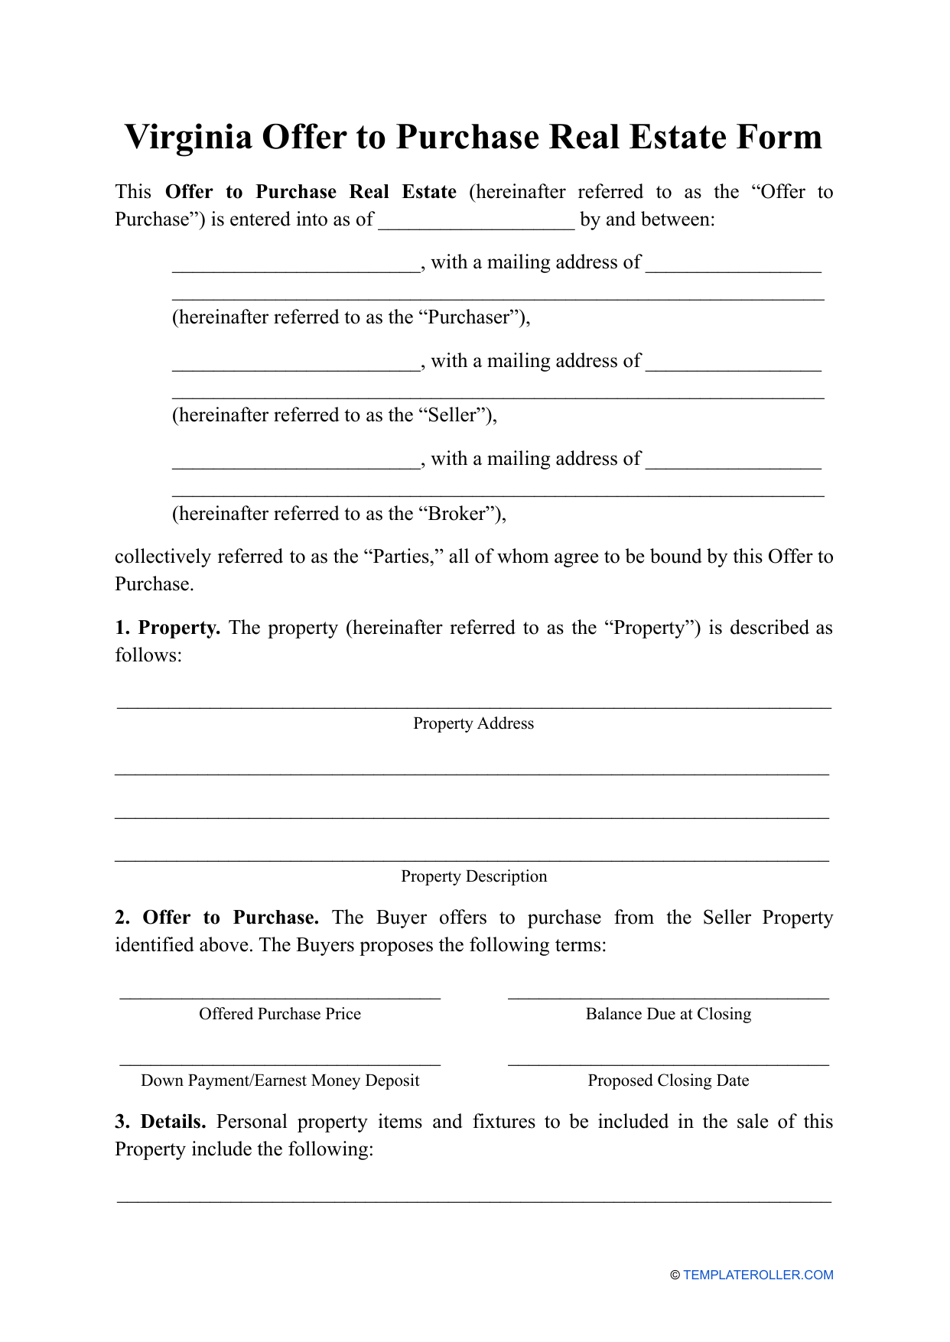 Offer to Purchase Real Estate Form - Virginia, Page 1